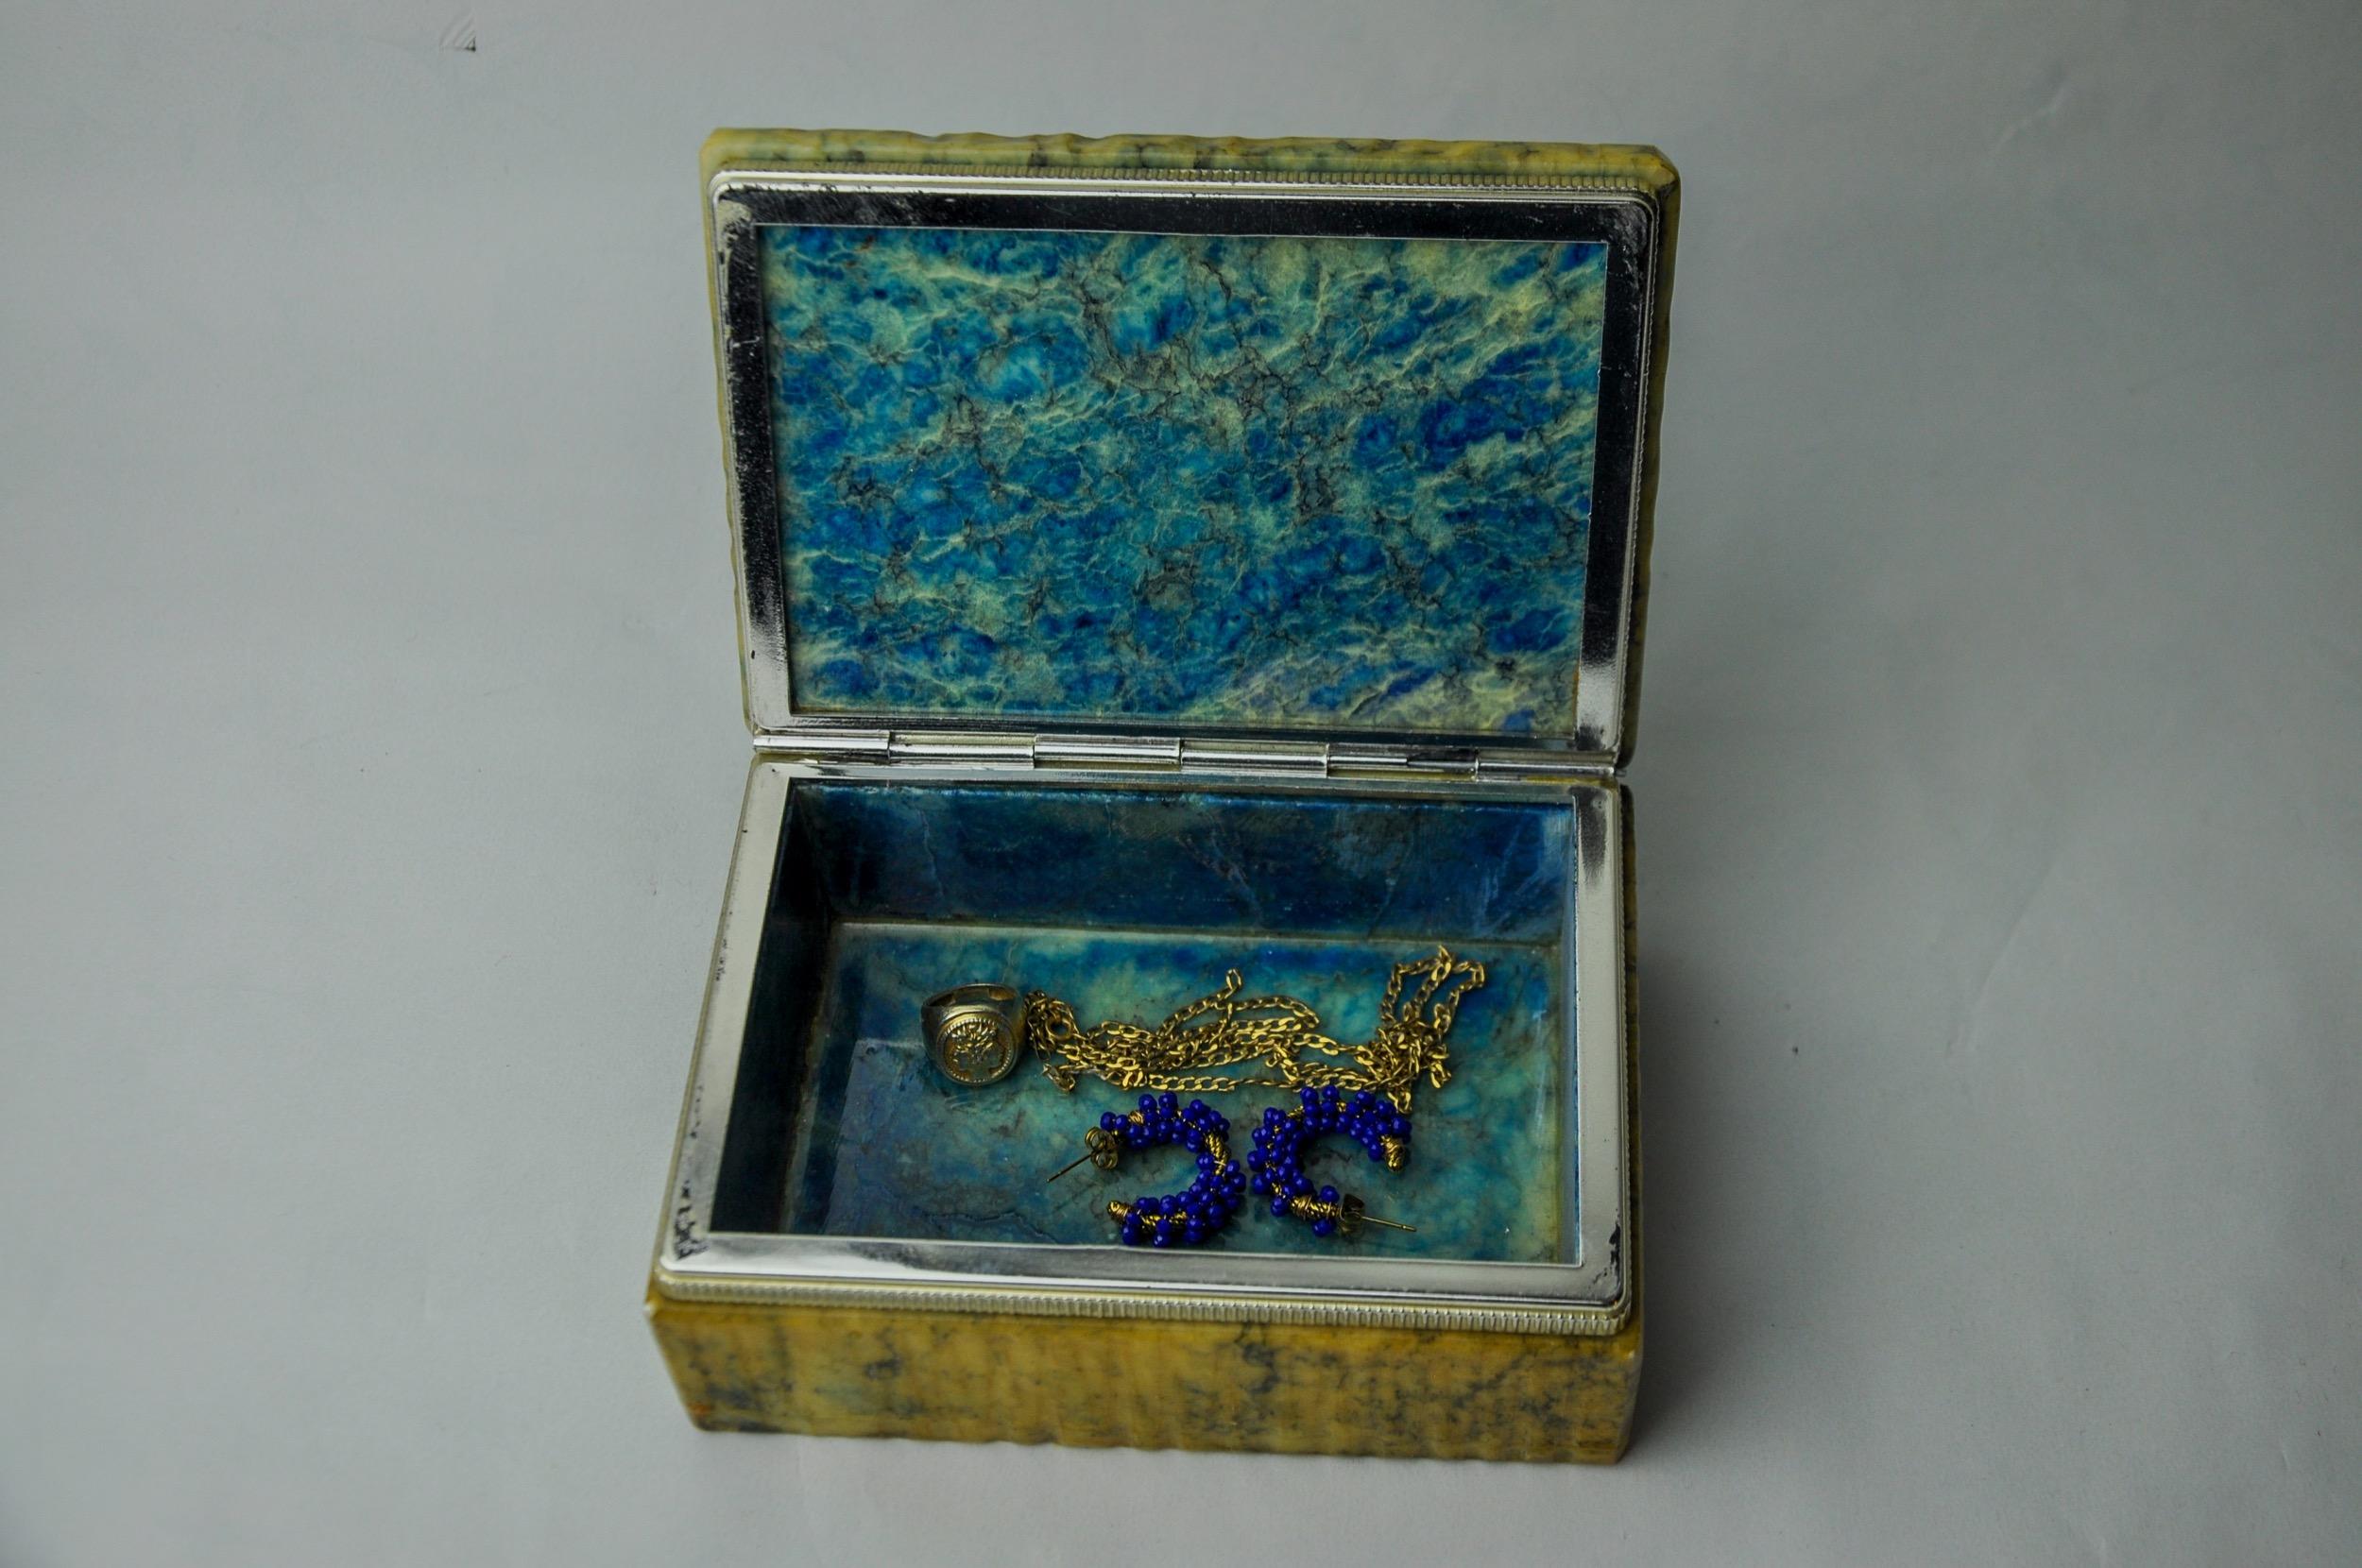 Superb alabaster box designed and produced by Romano Bianchi in Italy in the 1970s. Handcrafted yellow and bluish alabaster box and chrome metal structure. Decorative object that will bring a real designer touch to your interior. Very beautiful